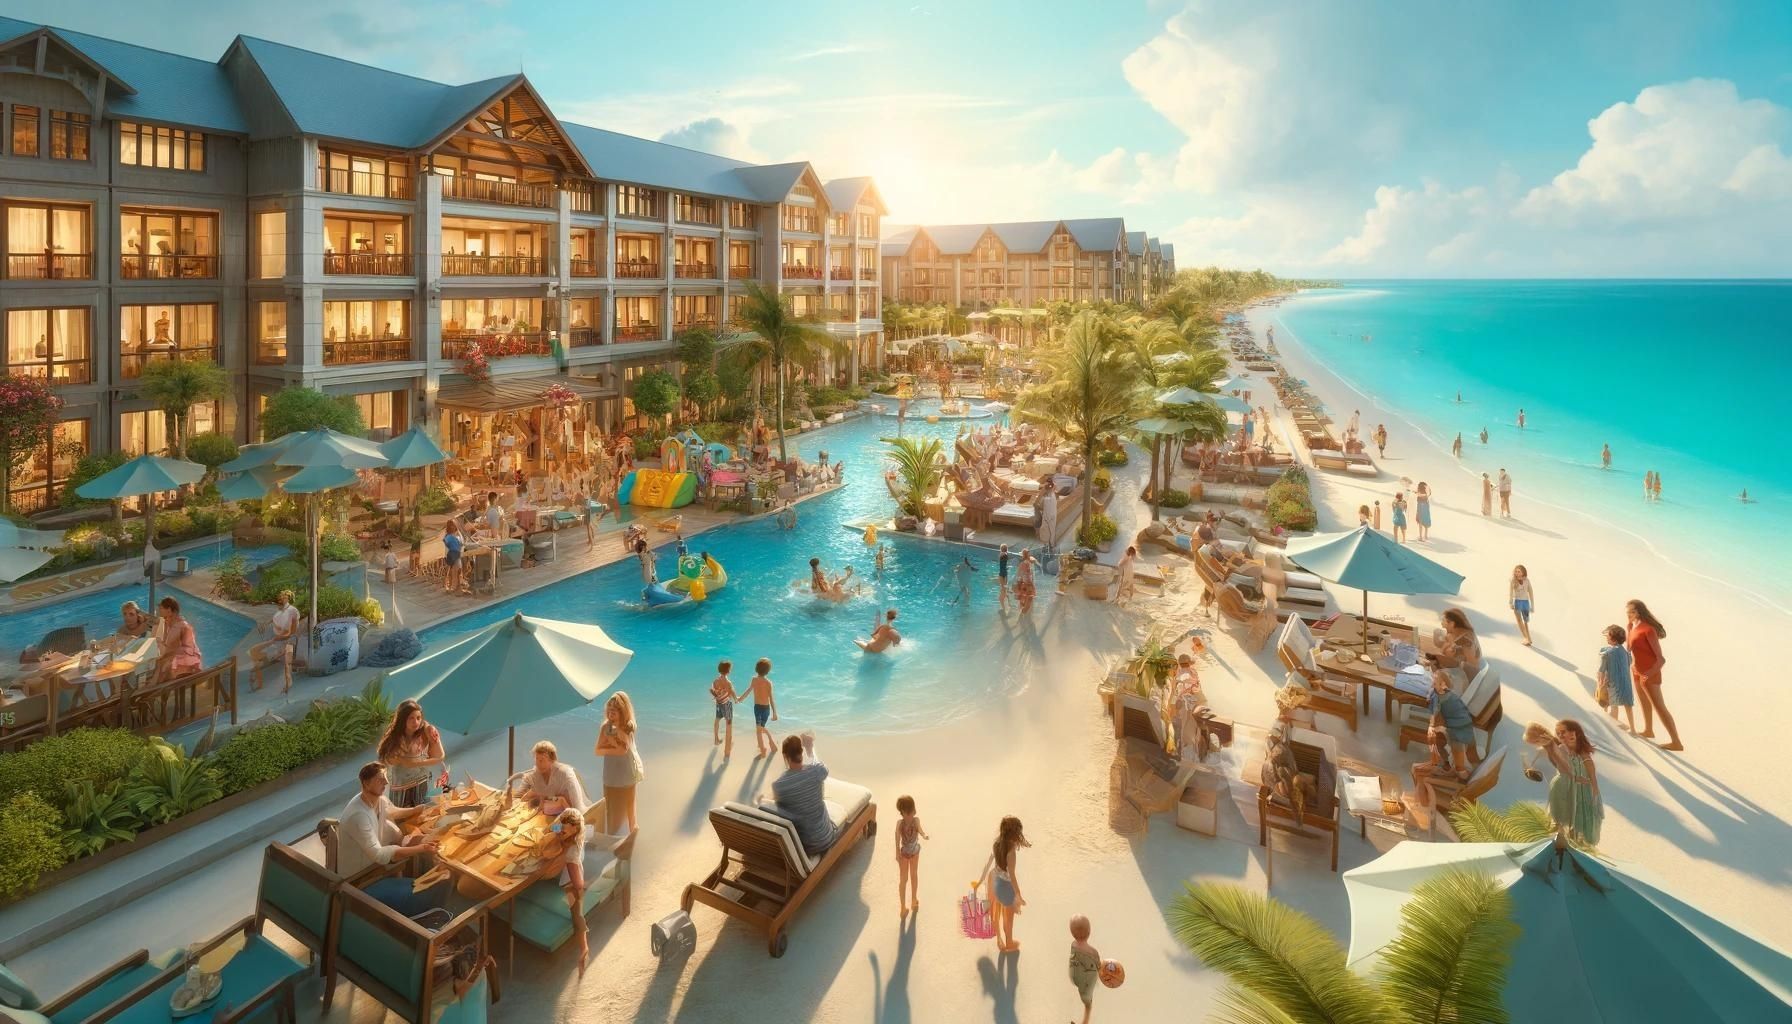 Are Sandals Resorts Family Friendly